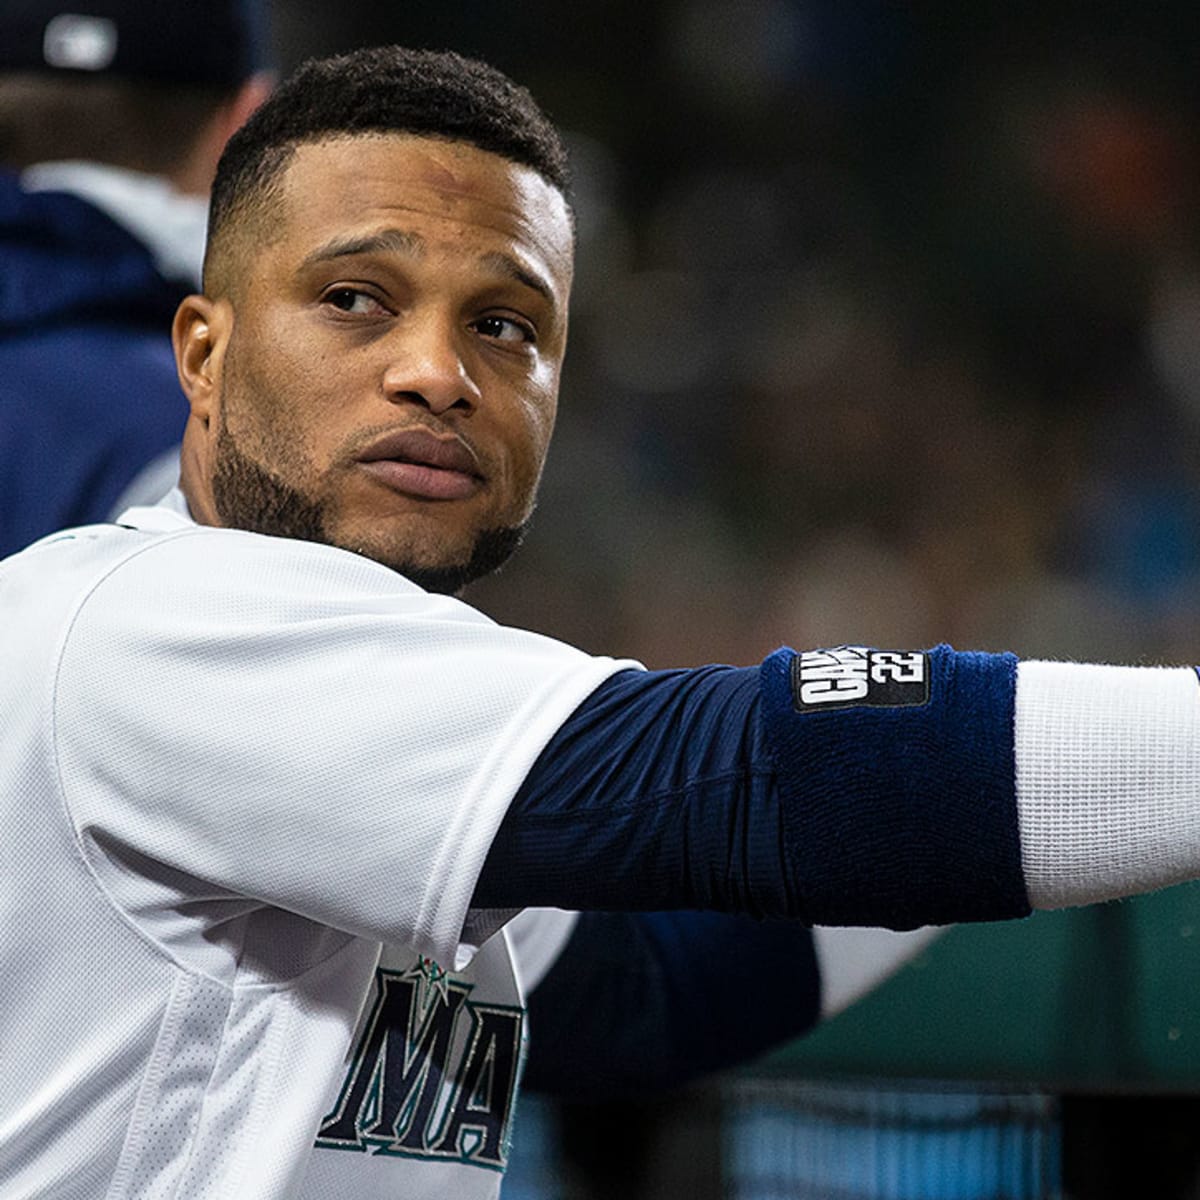 Robinson Cano Reportedly Wants $305 Million From the Yankees